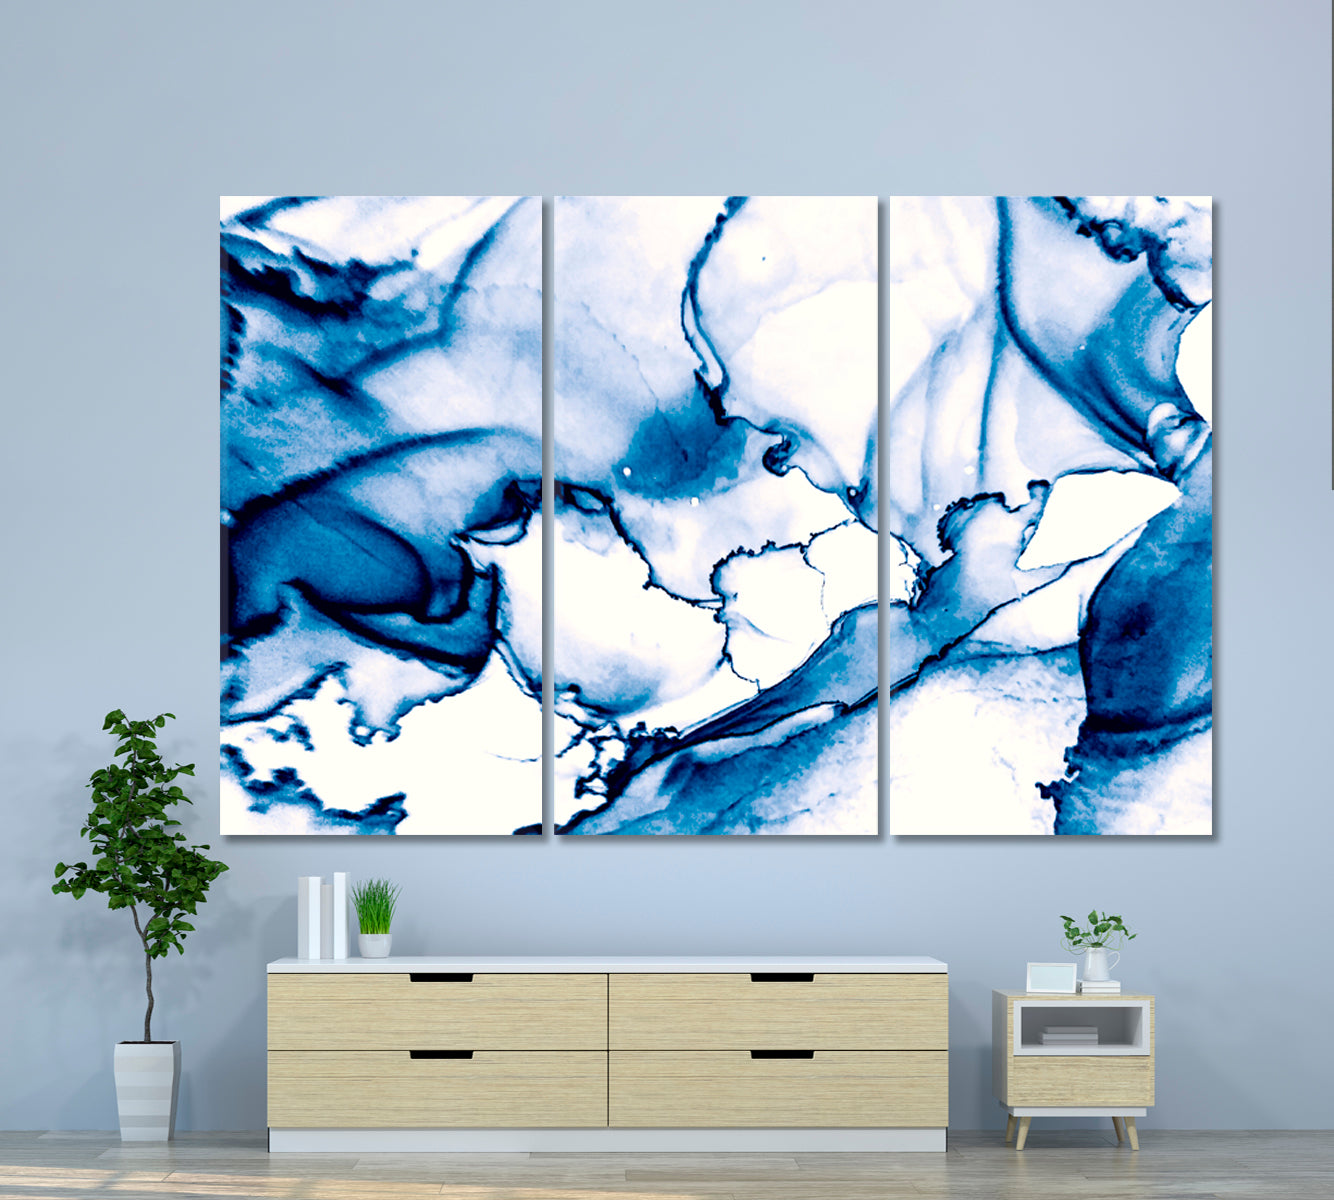 INK IN WATER Navy Blue Abstract Marble Veins Fluid Art, Oriental Marbling Canvas Print Artesty 3 panels 36" x 24" 